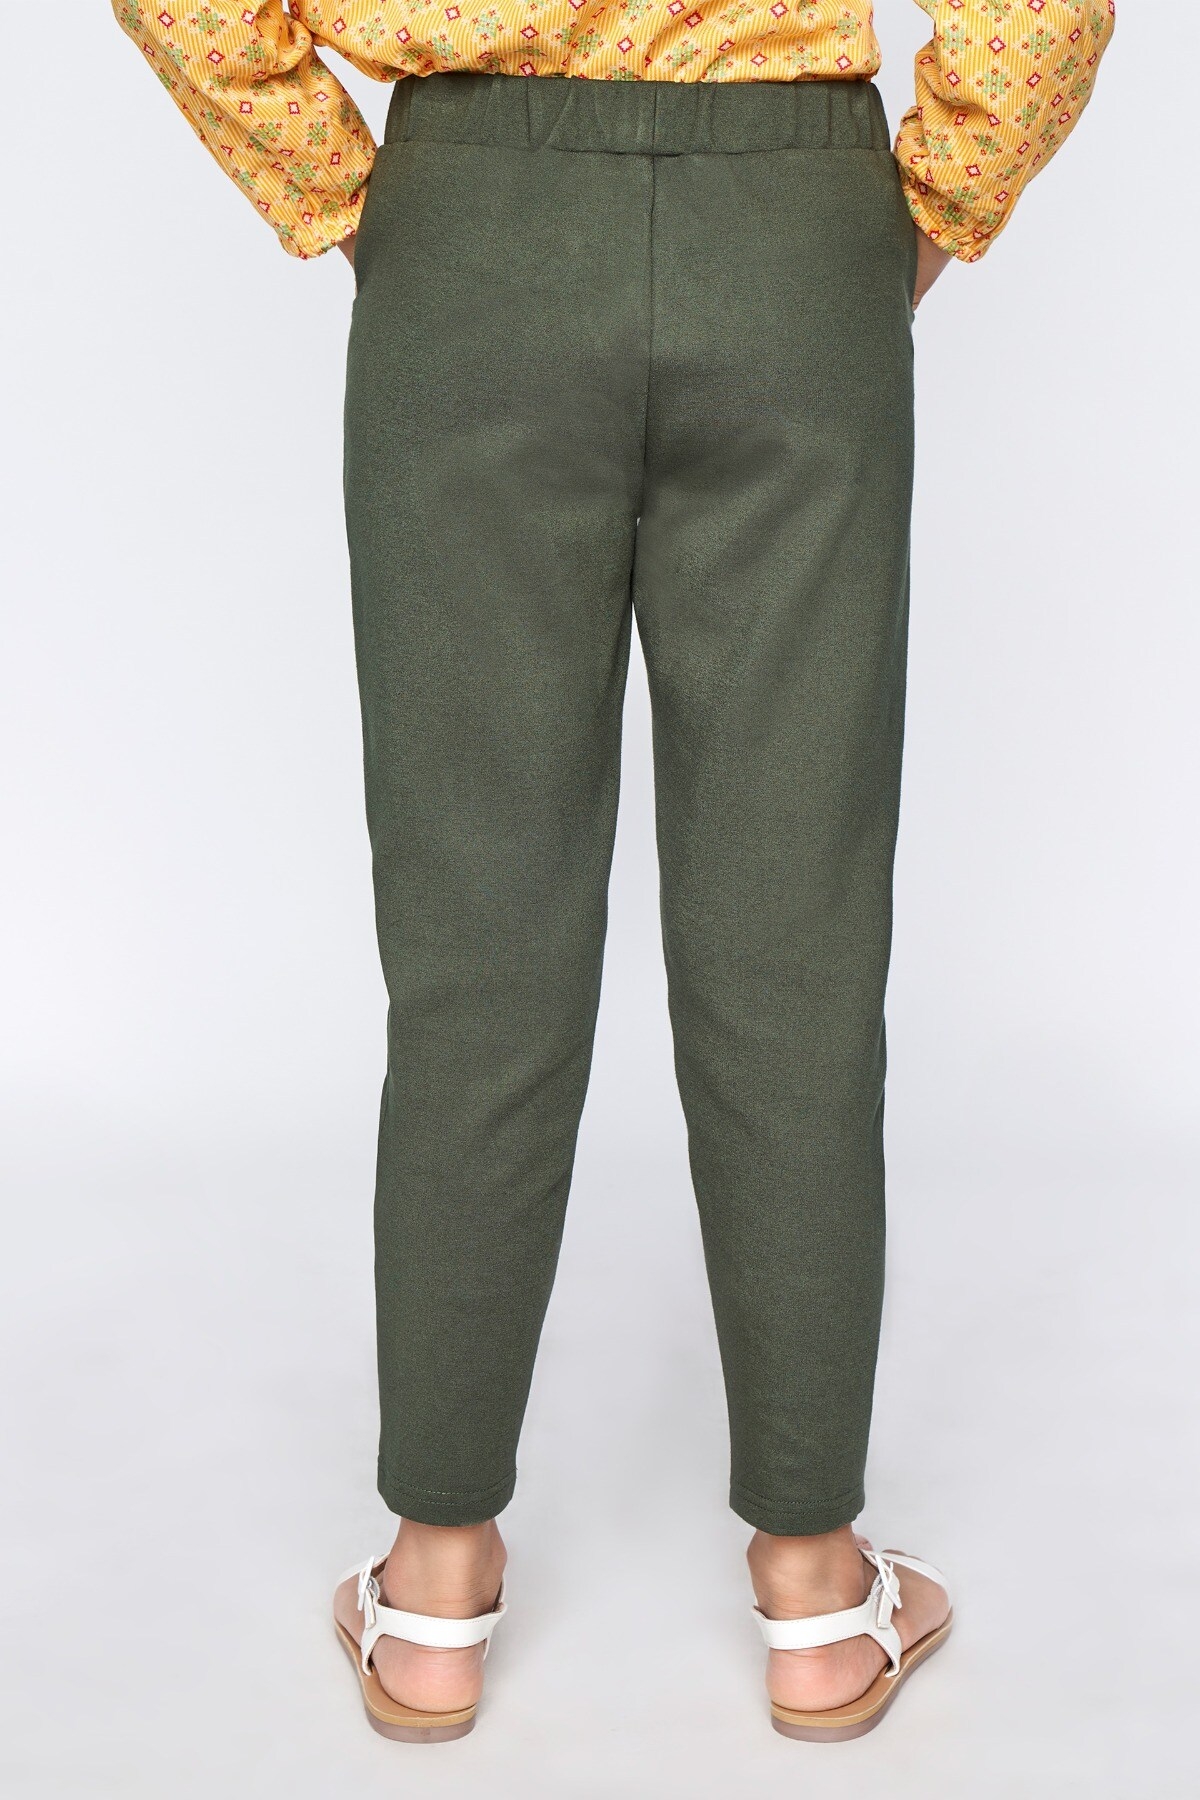 Olive Solid Straight Bottom